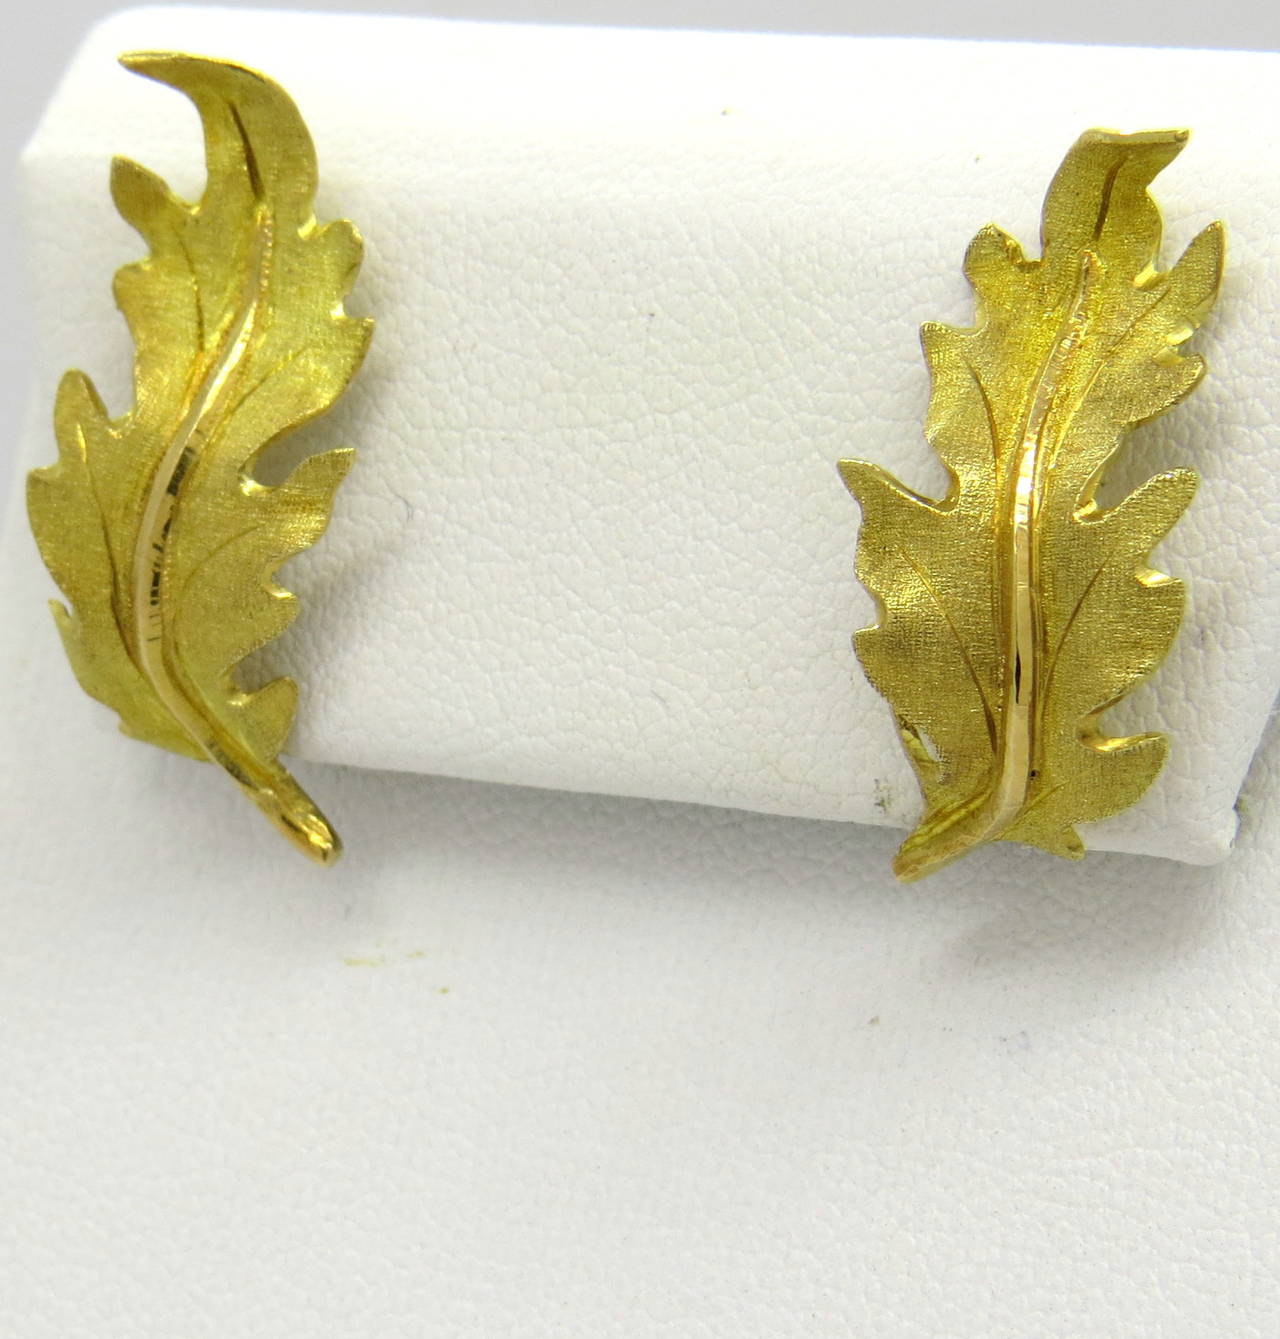 Mario Buccellati 18k gold earrings featuring leaf design. Earrings measure 26mm x 14mm. Marked. M. Buccellati,18k and Italy. weight - 4.2gr